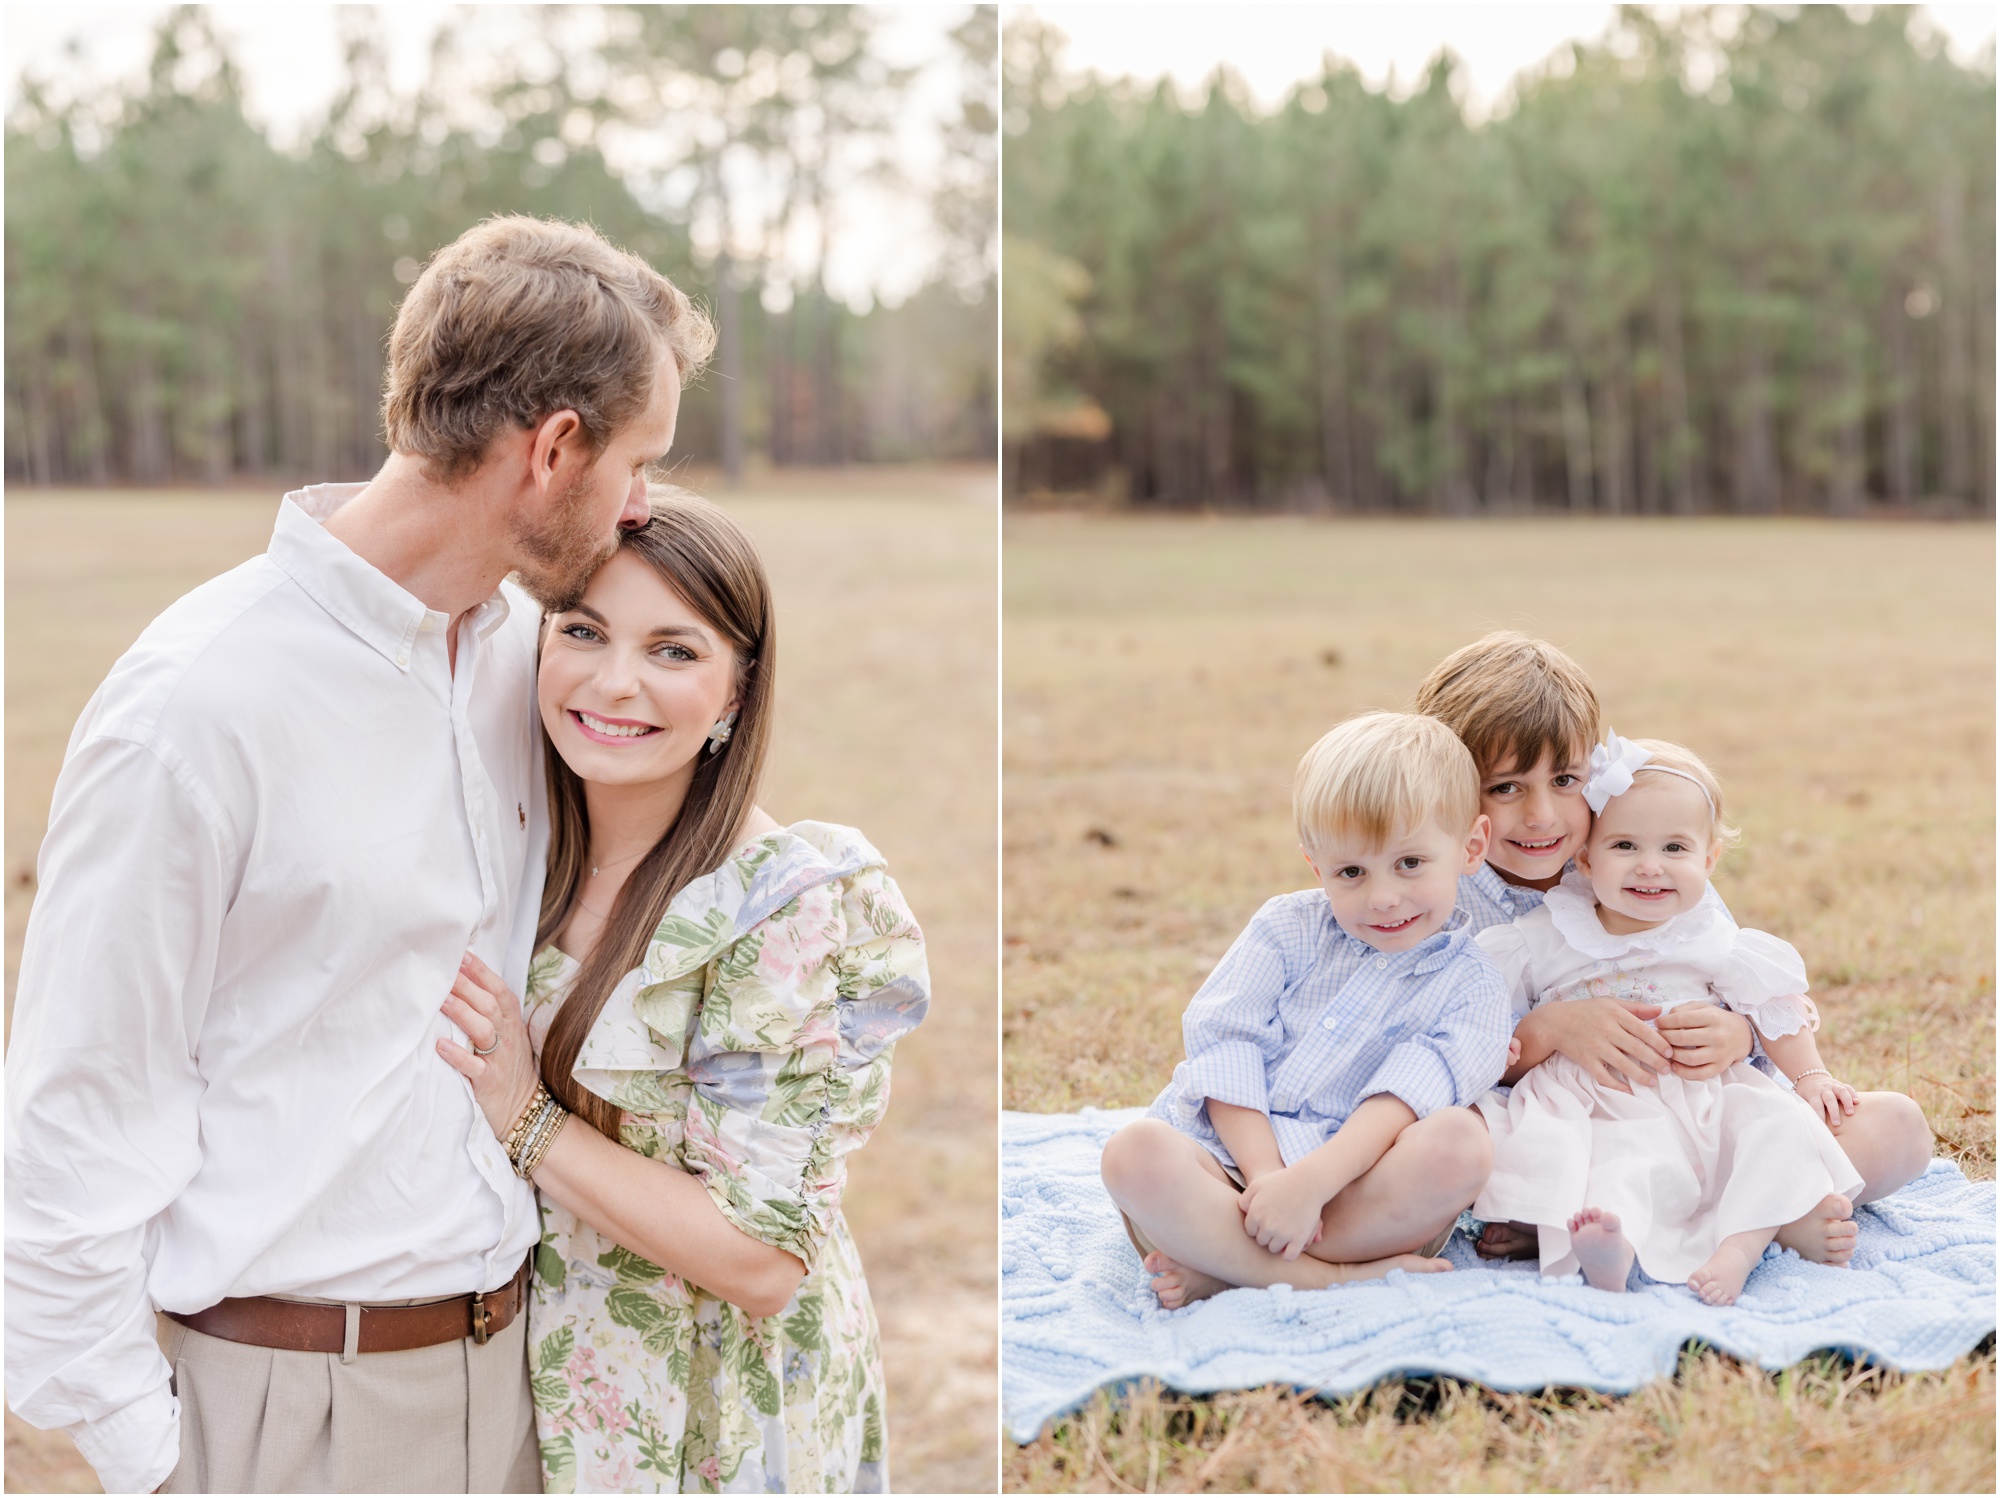 A father kisses his wife on the head and two brother sit on a blue blanket with their one year old sister during their Greenville Family photos.